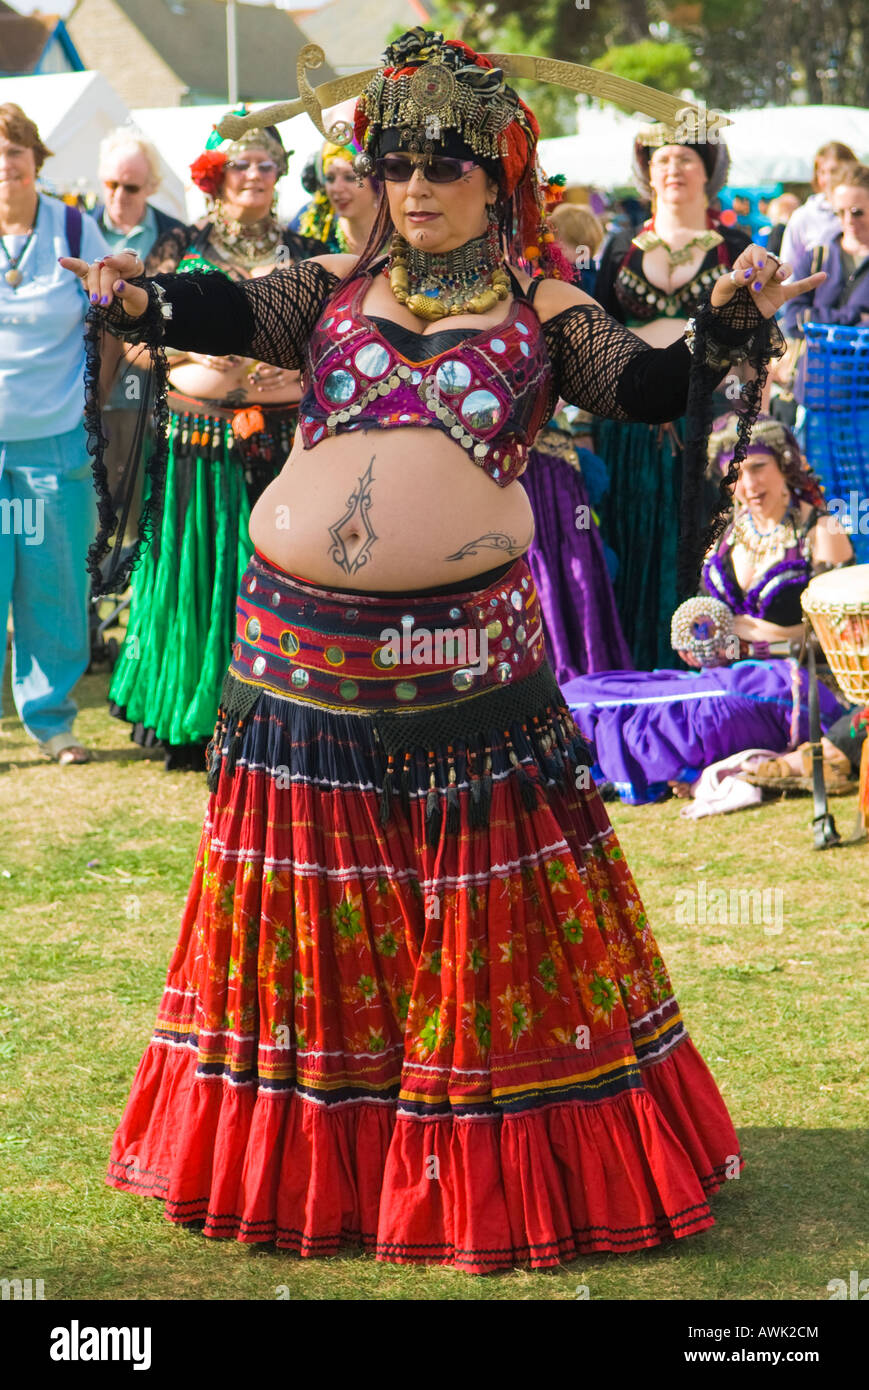 Swanage Folk Festival, fat flamboyant belly dancer, spectacular dress, troupe performing in show grounds, September,Swanage, Dorset, UK, Stock Photo